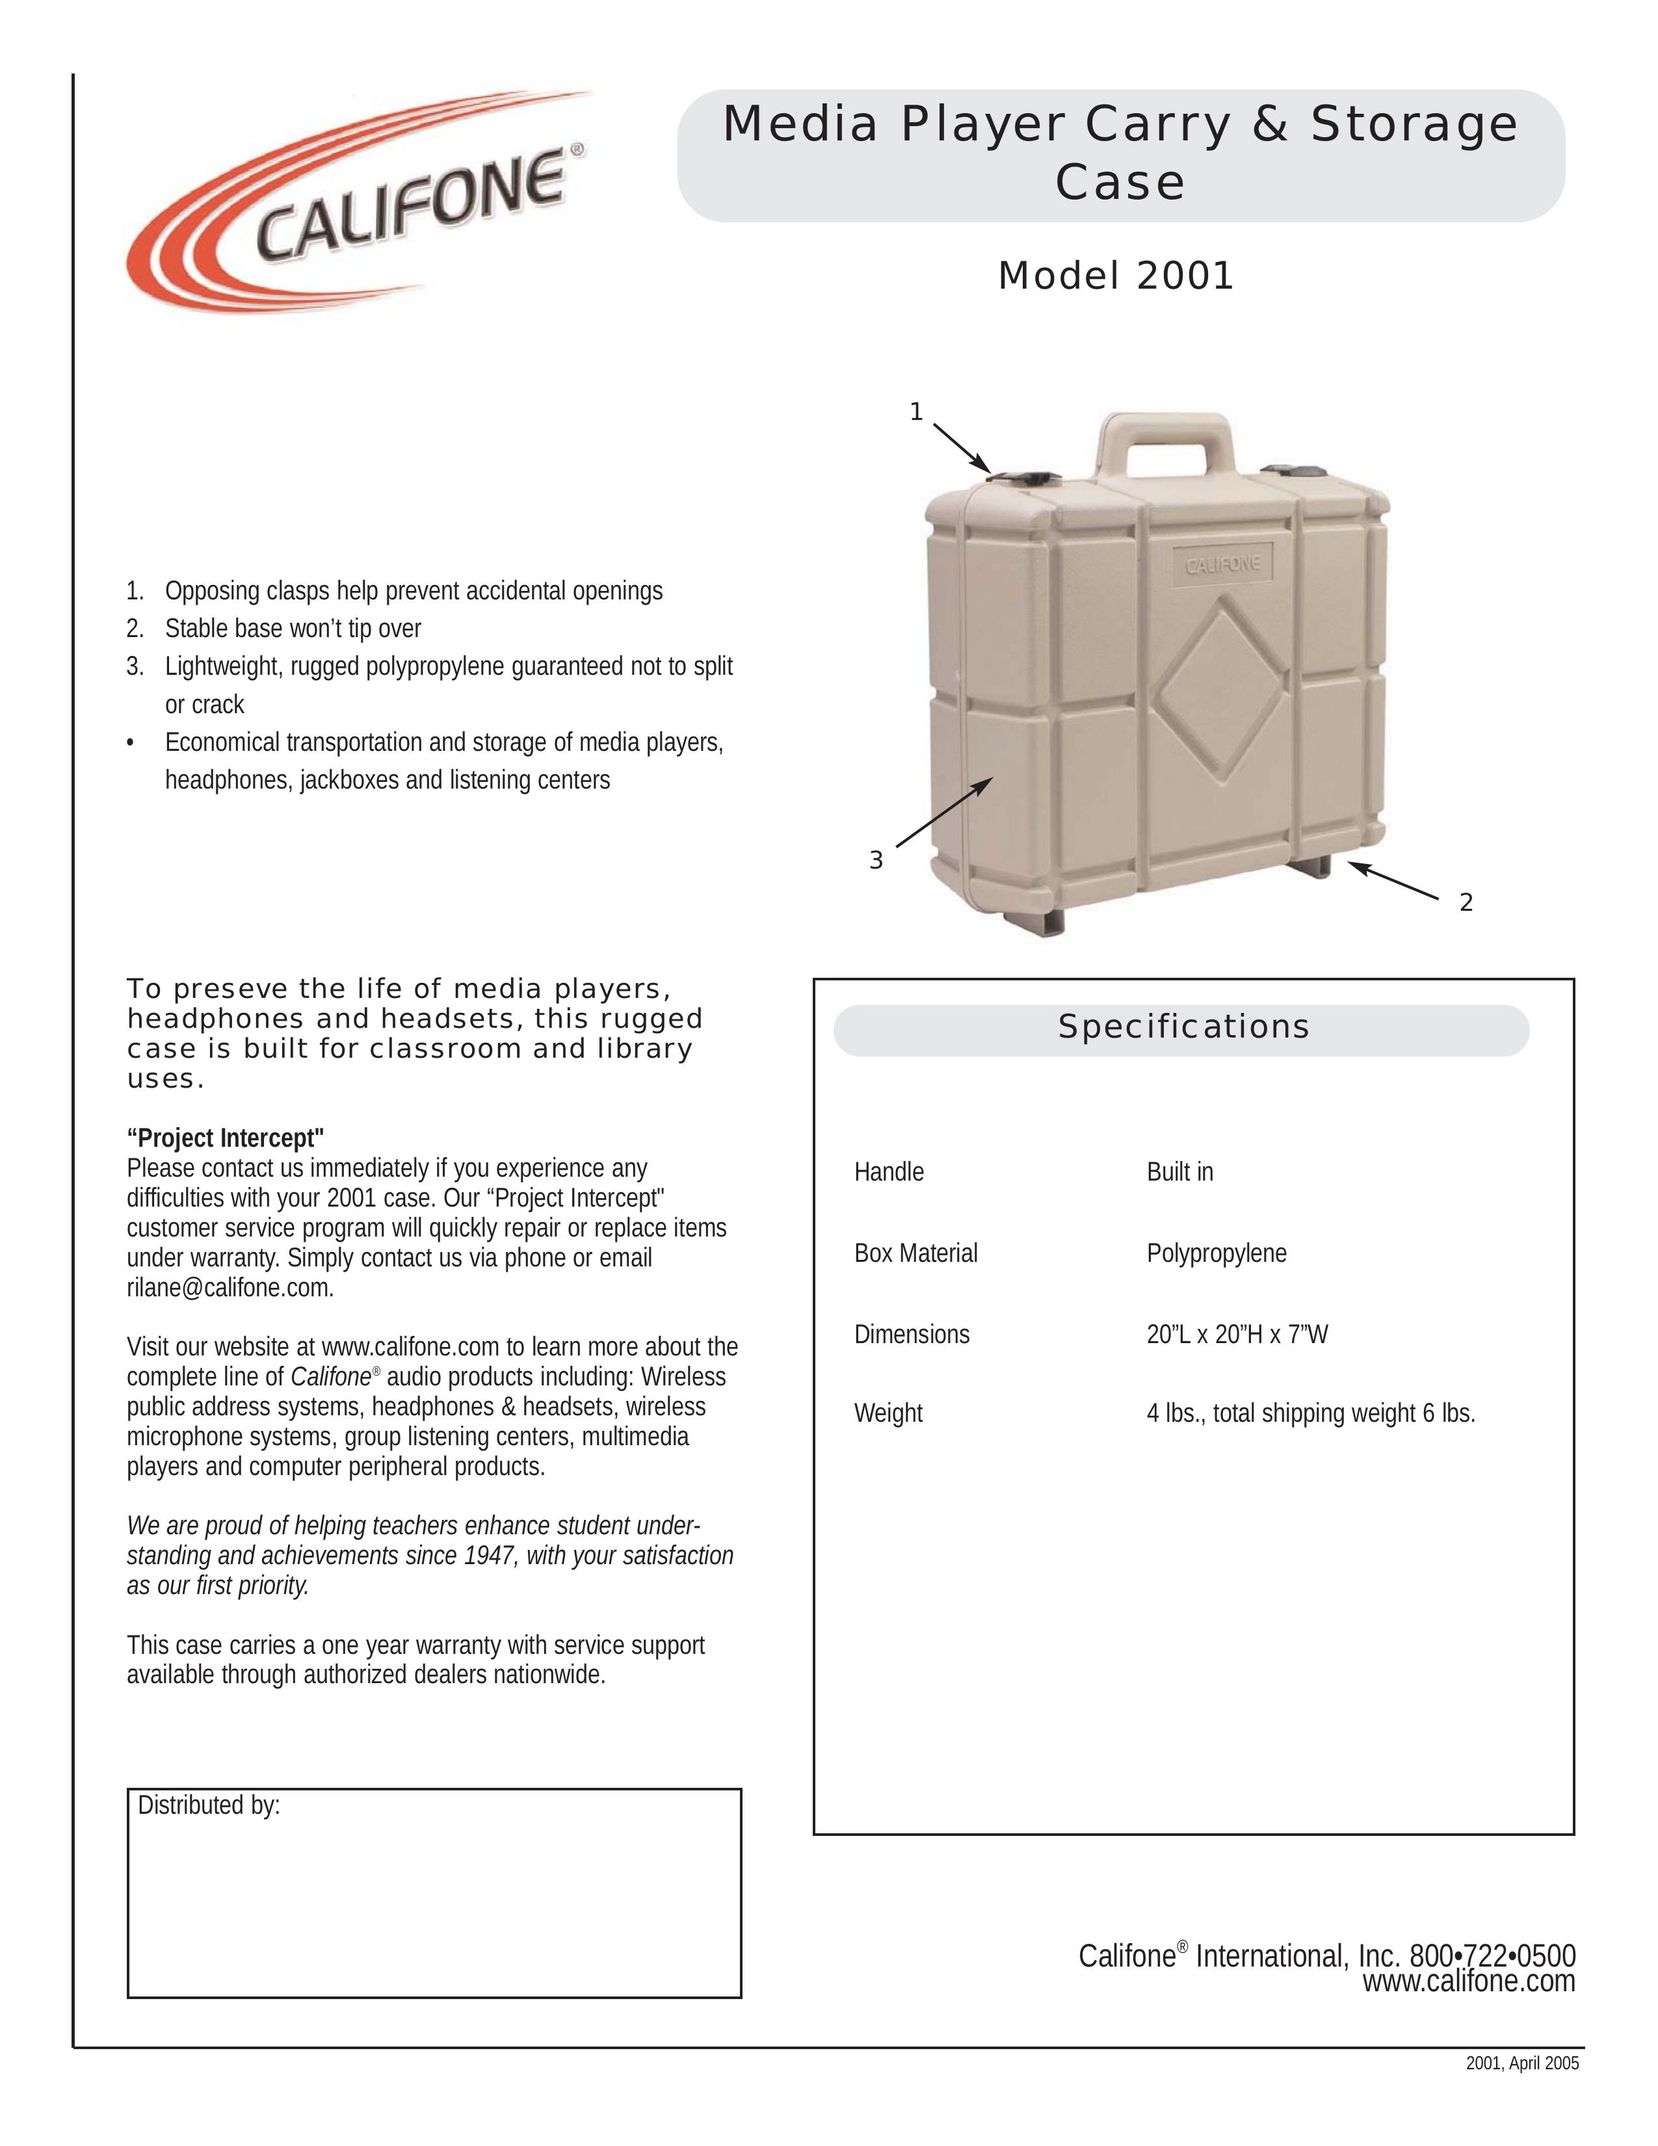 Califone 2001 Carrying Case User Manual (Page 1)